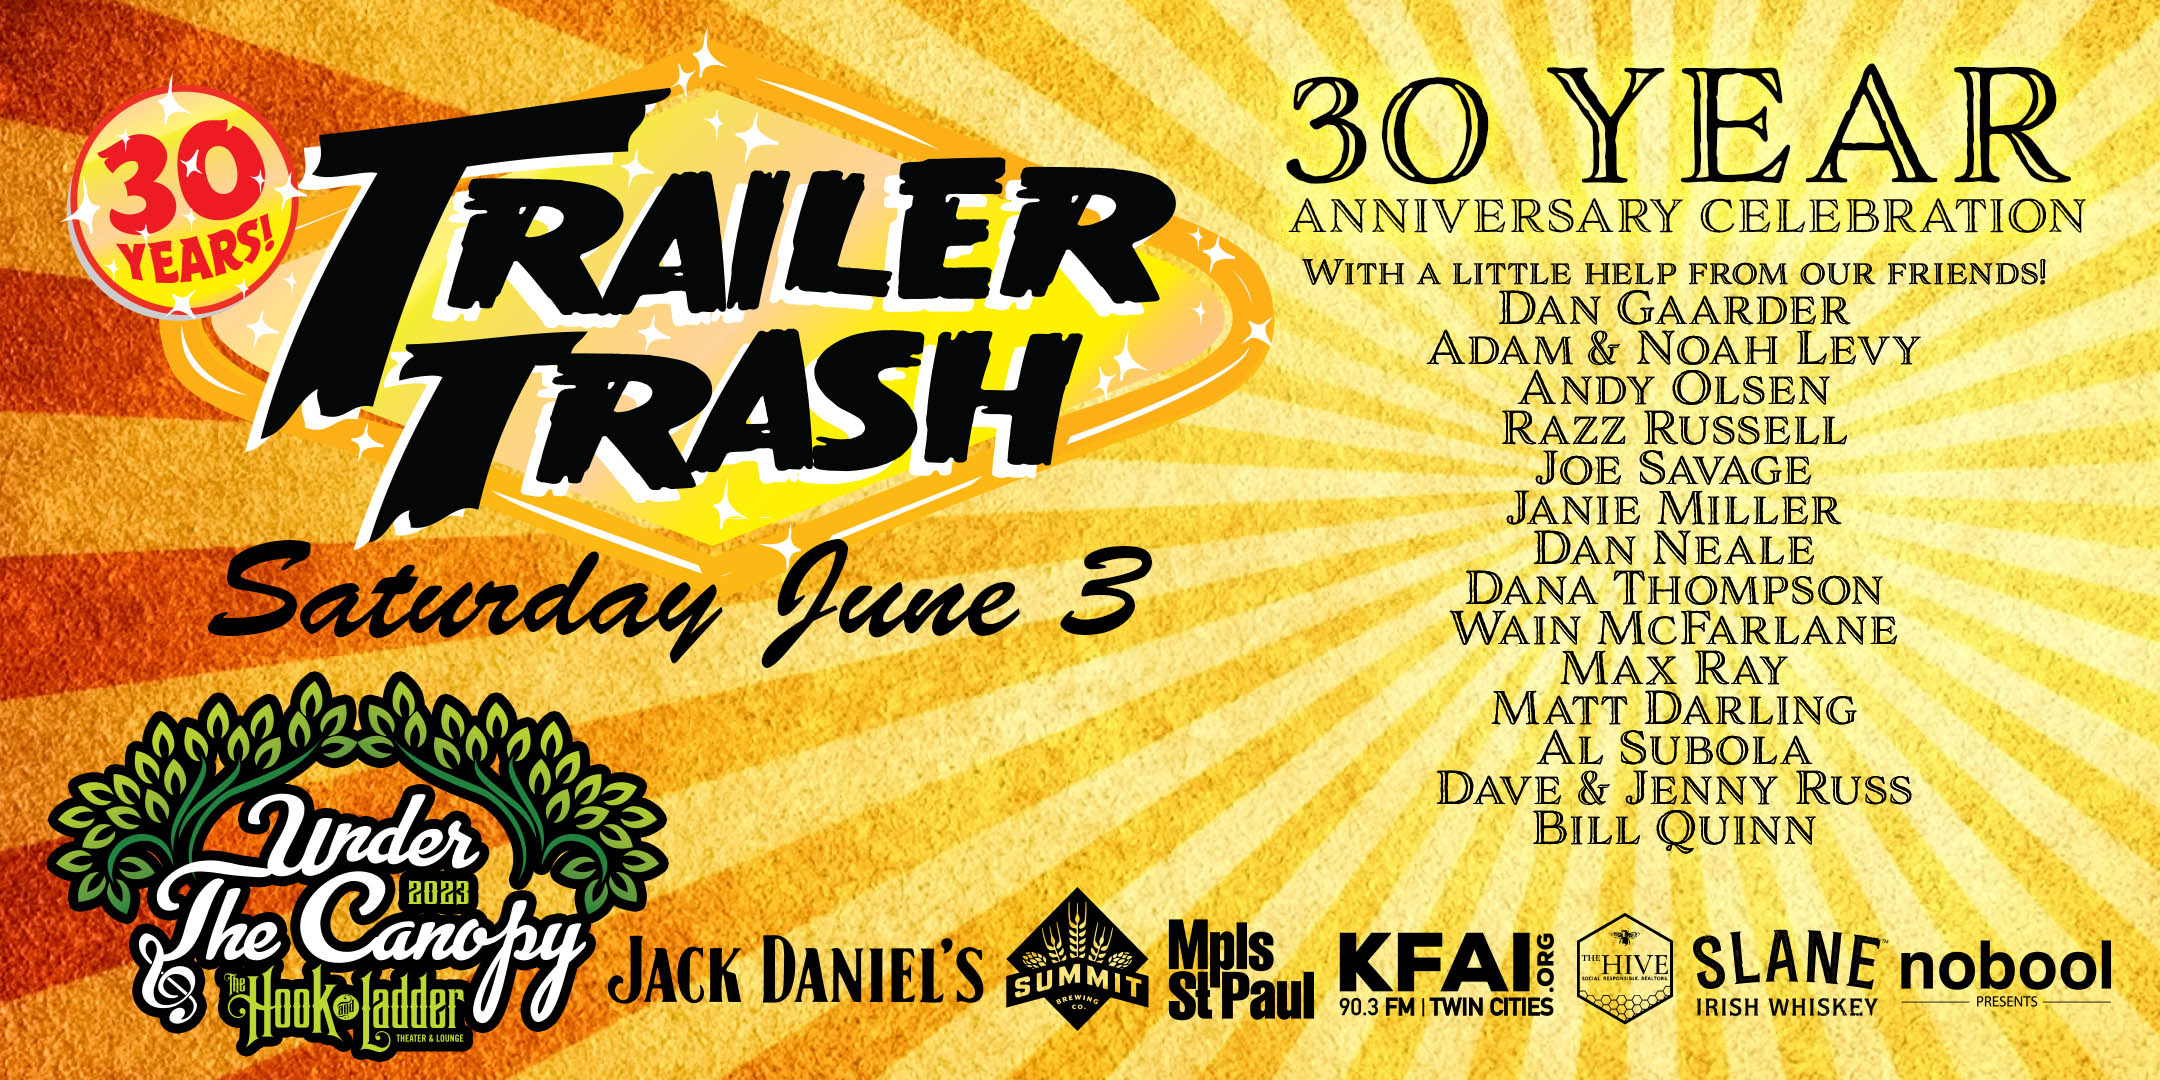 Trailer Trash’s 30th Anniversary Celebration Saturday, June 3, 2023 Under The Canopy at The Hook and Ladder Theater "An Urban Outdoor Summer Concert Series" Doors 6:00pm :: Music 7:00pm :: 21+ Reserved Seats: $40 GA: $24 ADV / $30 DOS